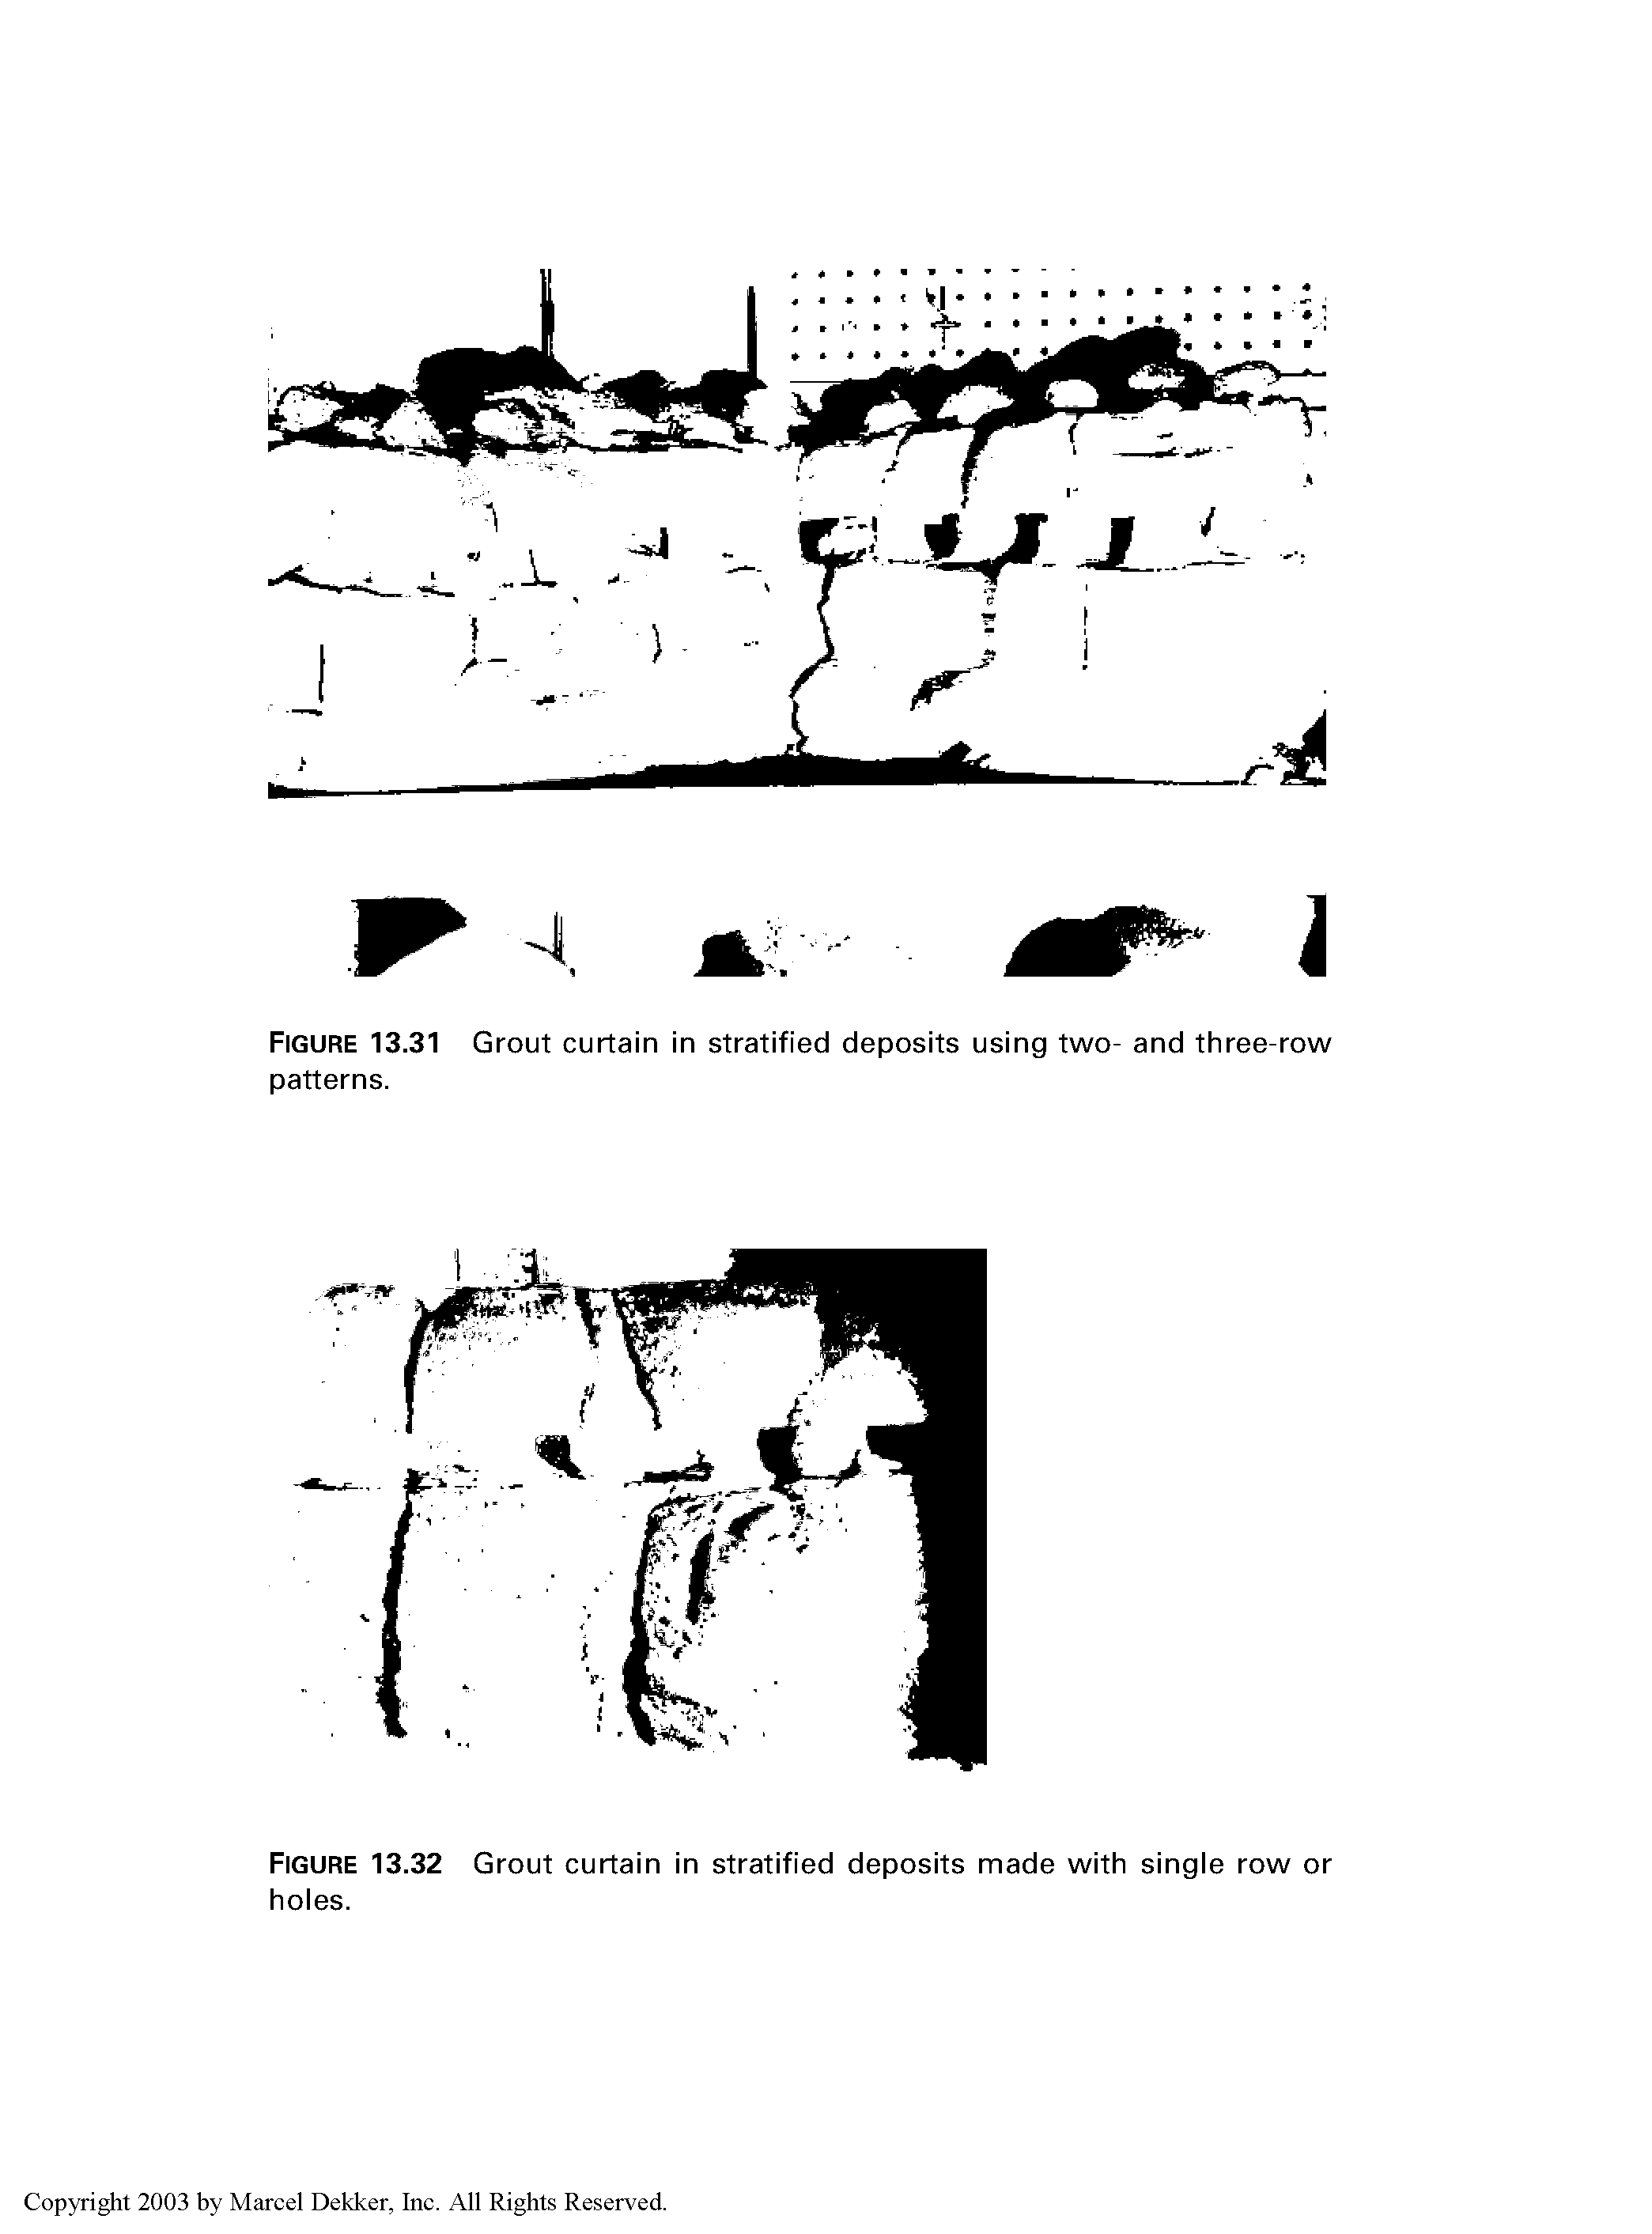 Figure 13.32 Grout curtain in stratified deposits made with single row or holes.